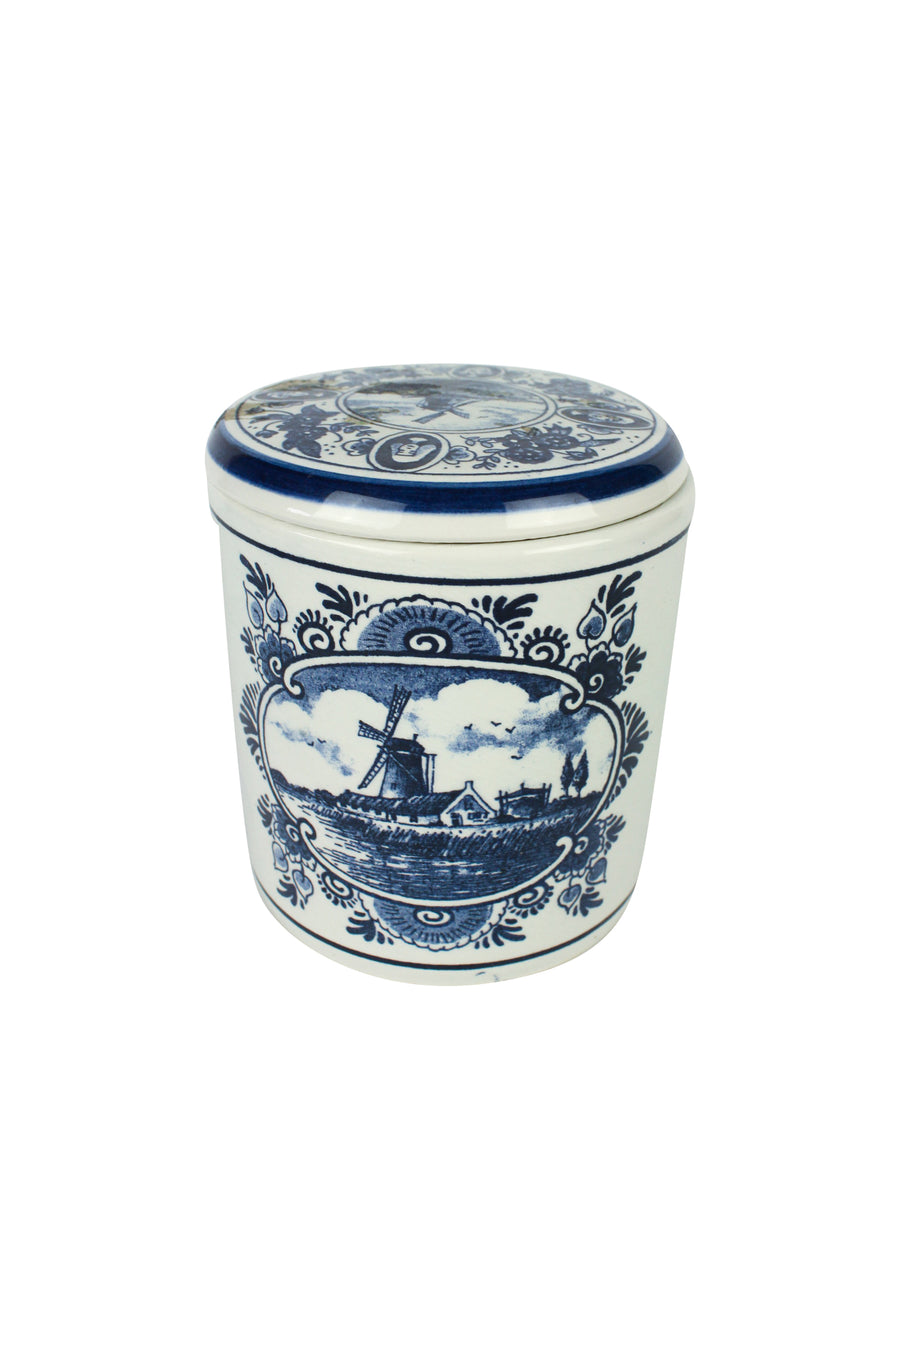 Delft Canister